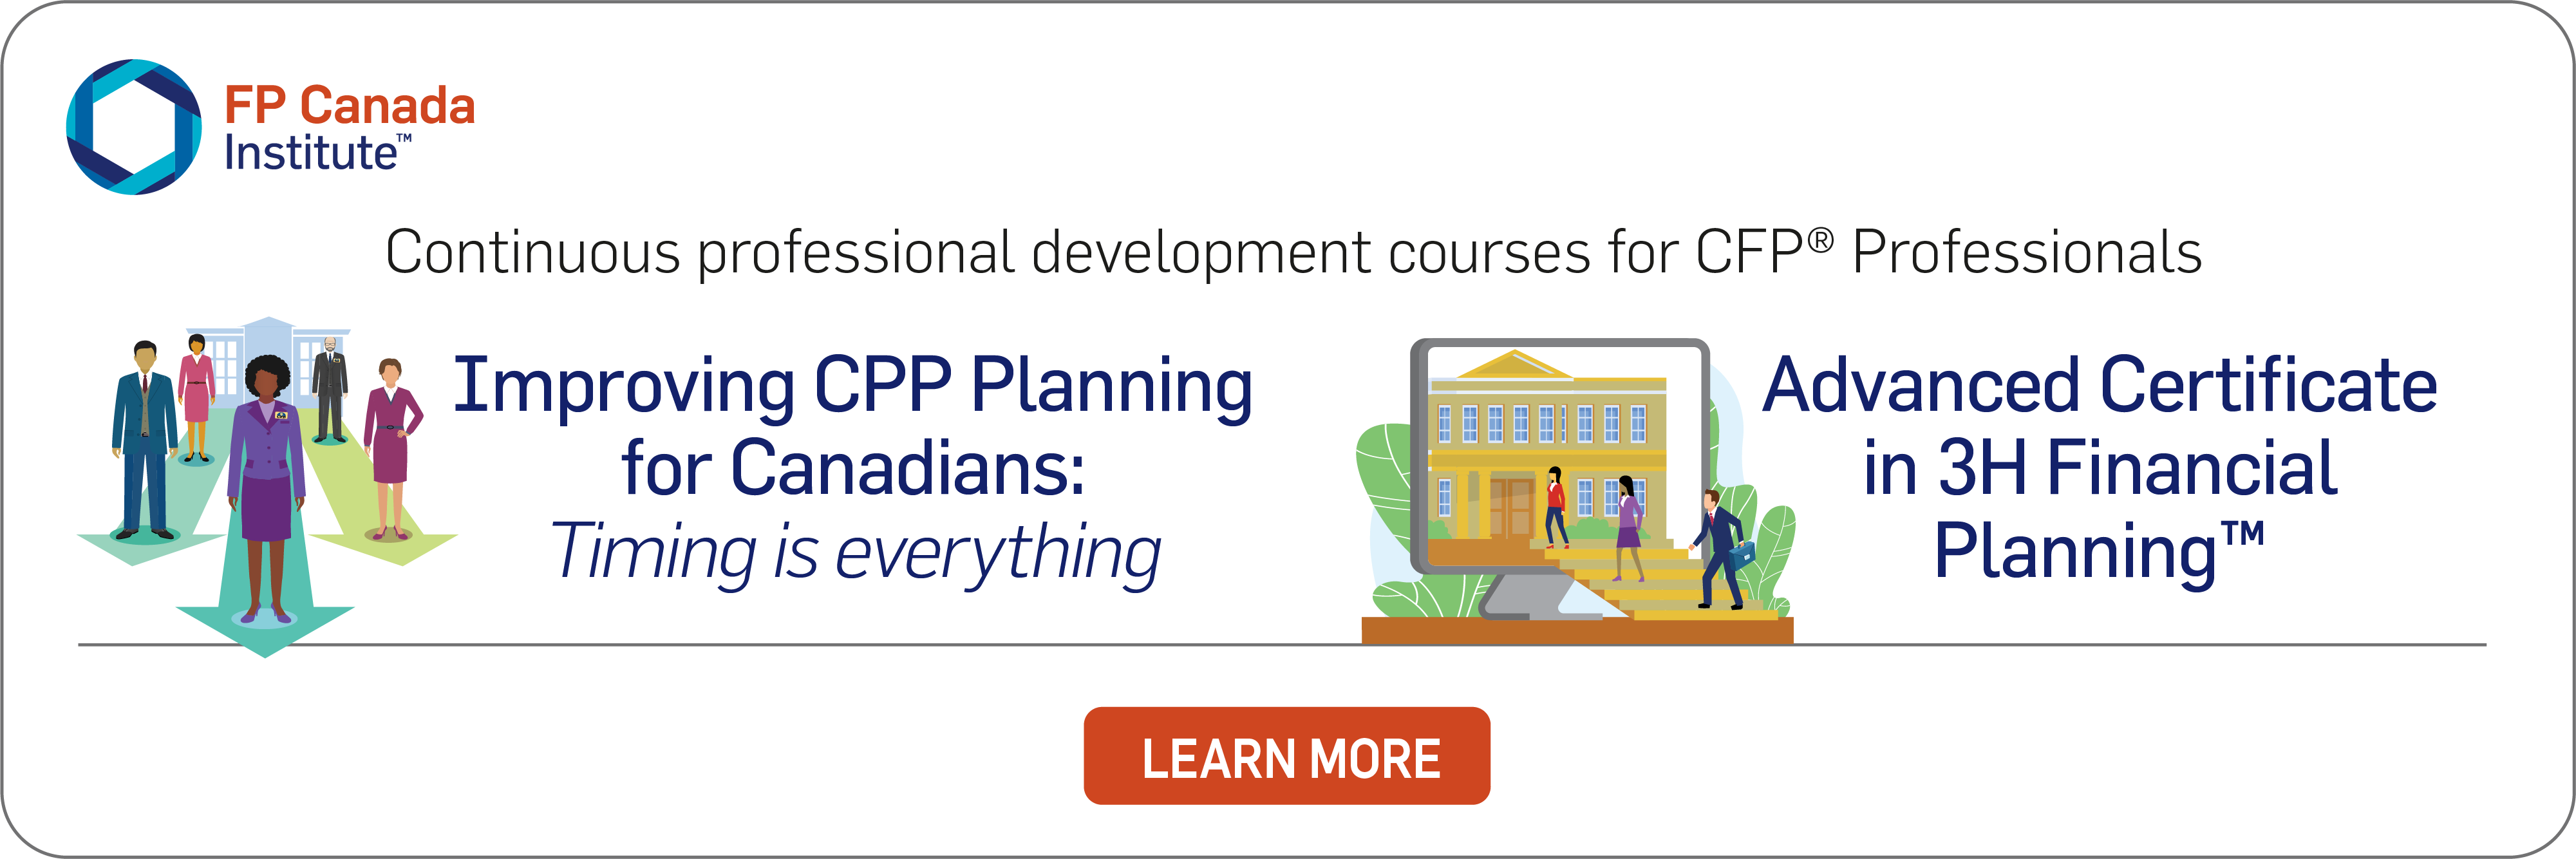 CPP and AC3H Continuous Professional Development Courses for CFP Professionals